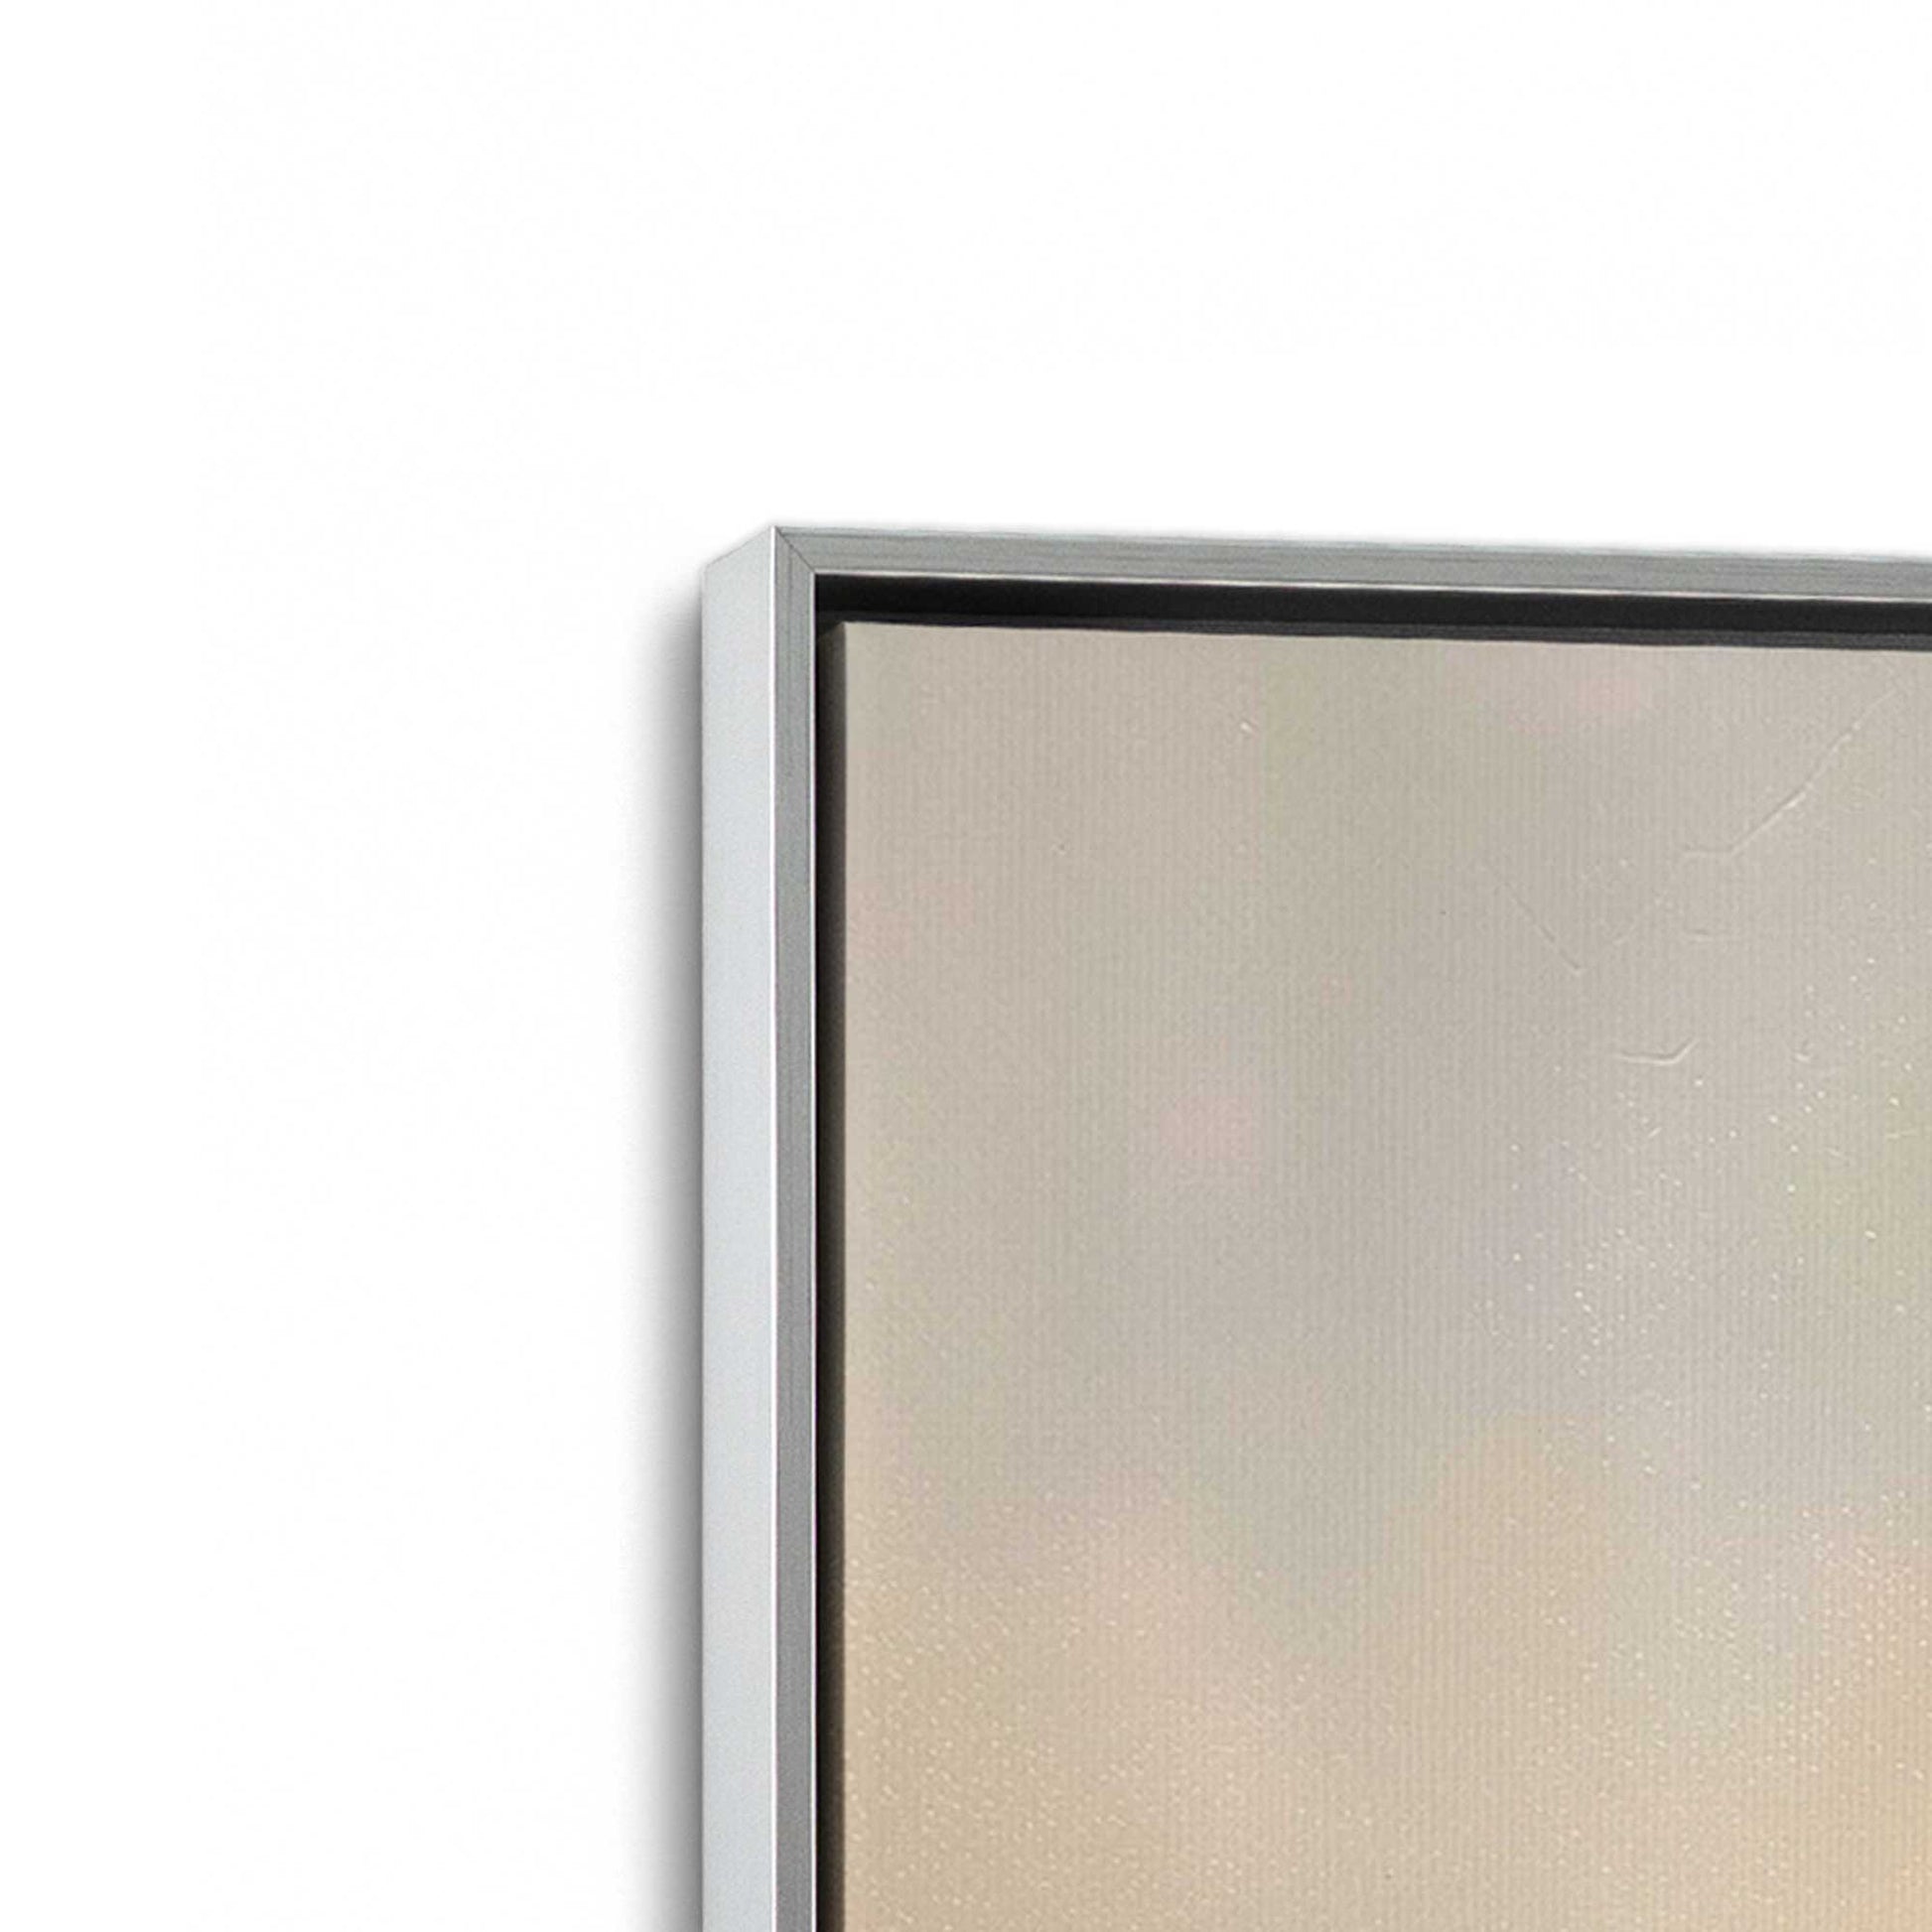 [Color:Polished Chrome], Picture of the corner of the art